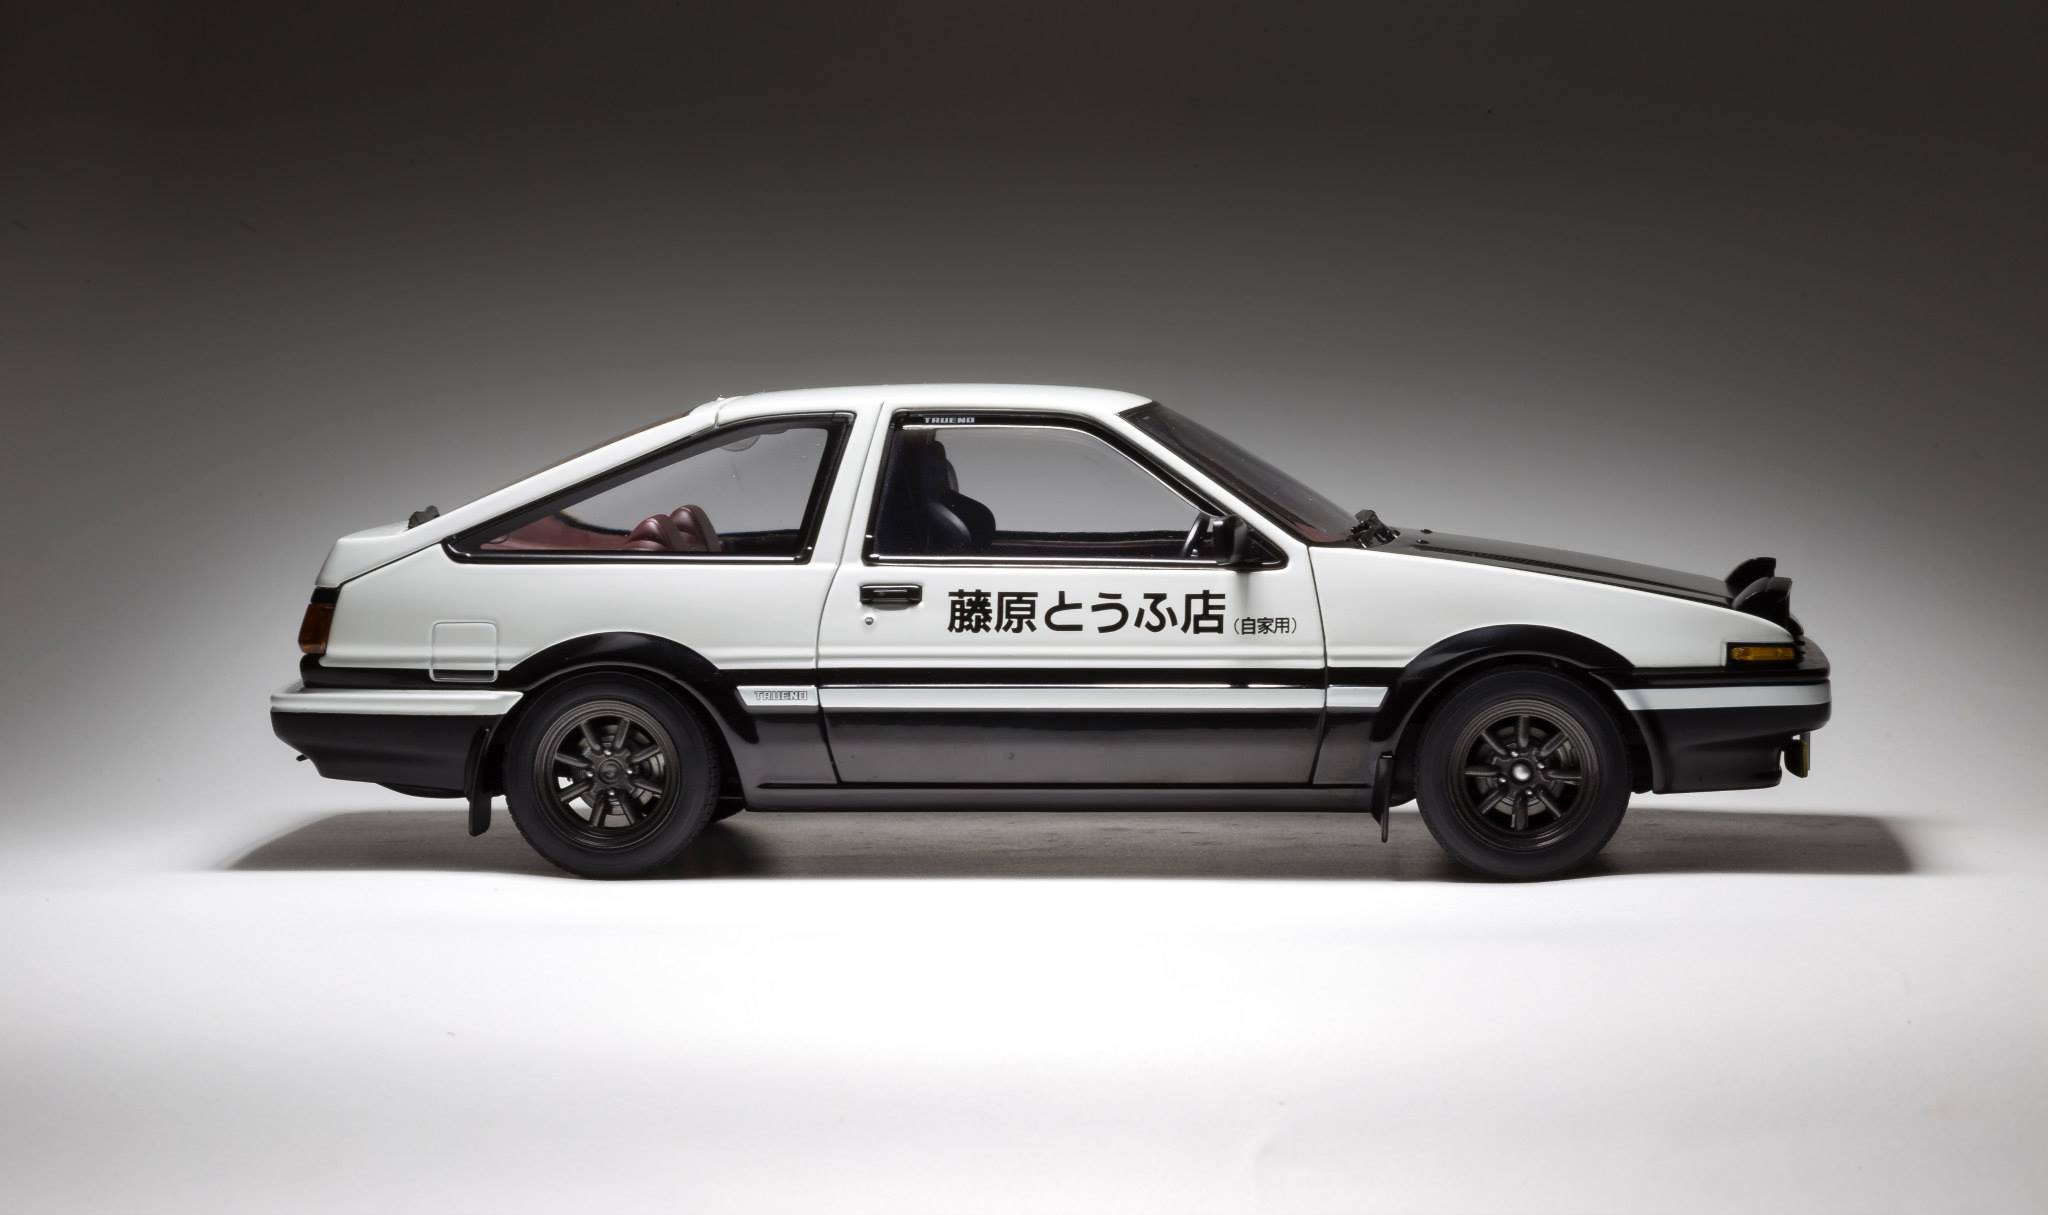 AE86 Toyota Logo - Could anybody translate what's written on the Initial D AE86?